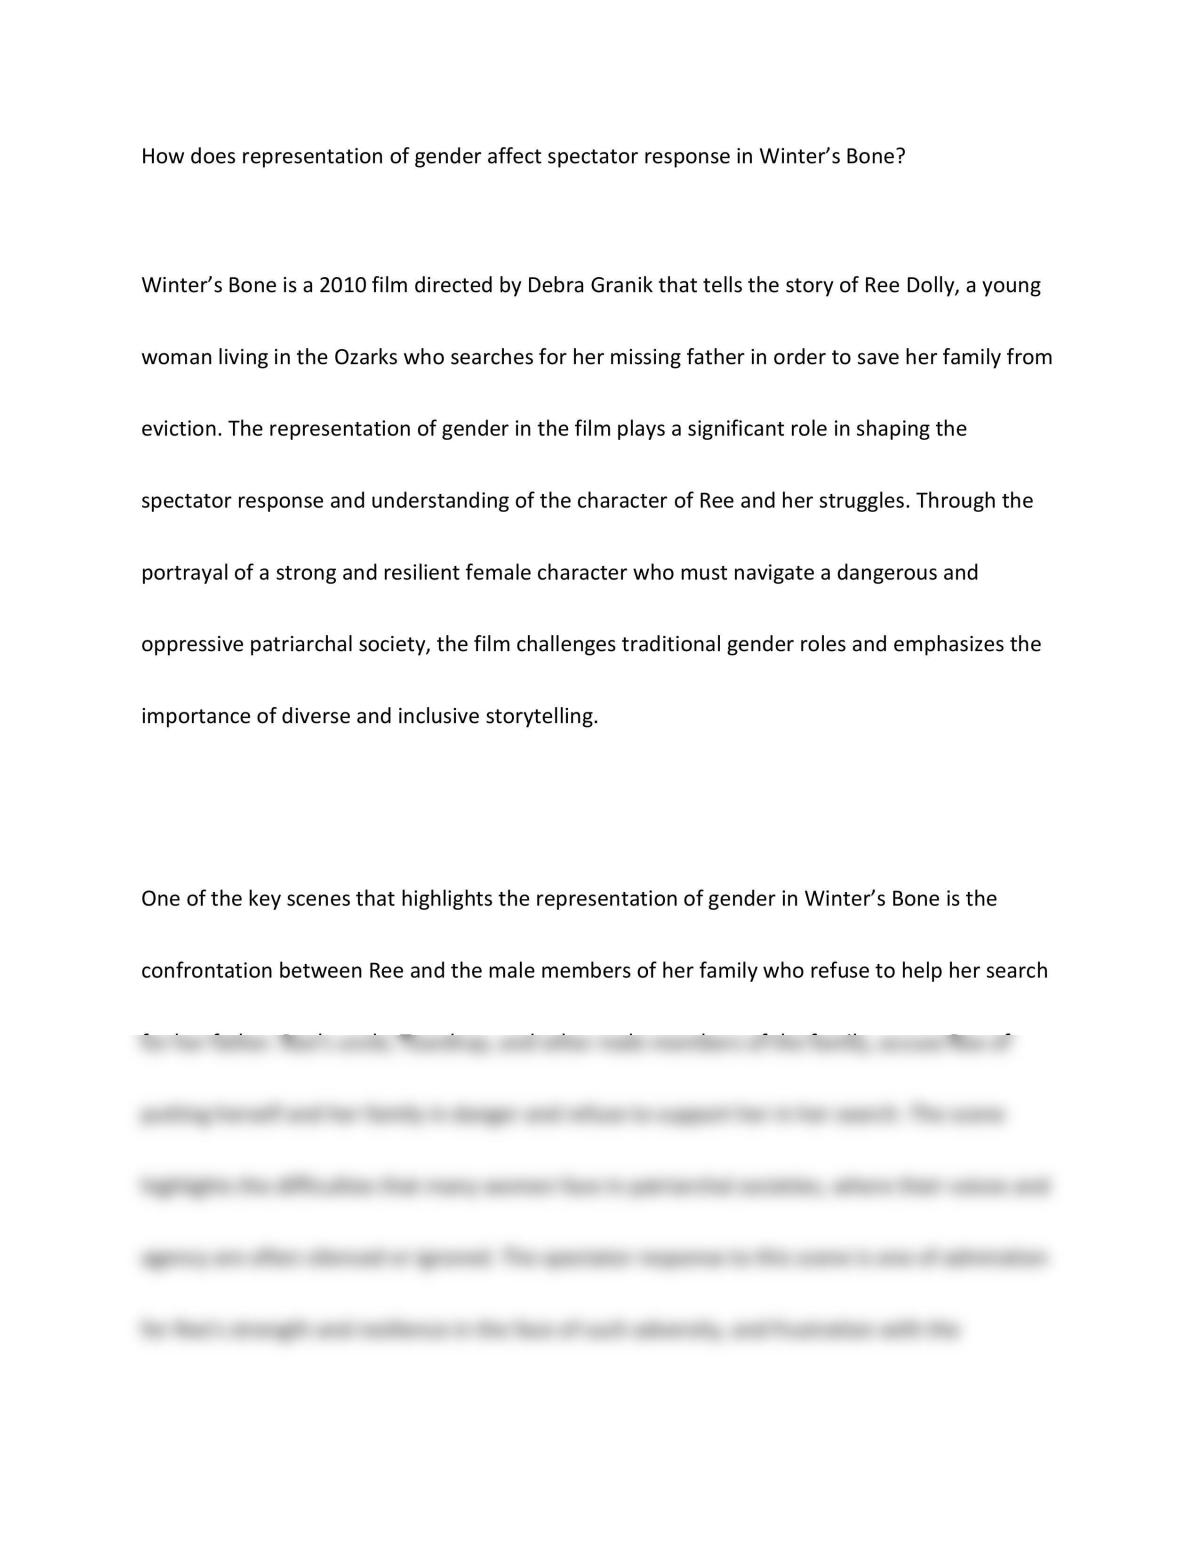 Essay on gender and spectatorship in Winter's bone - Page 1